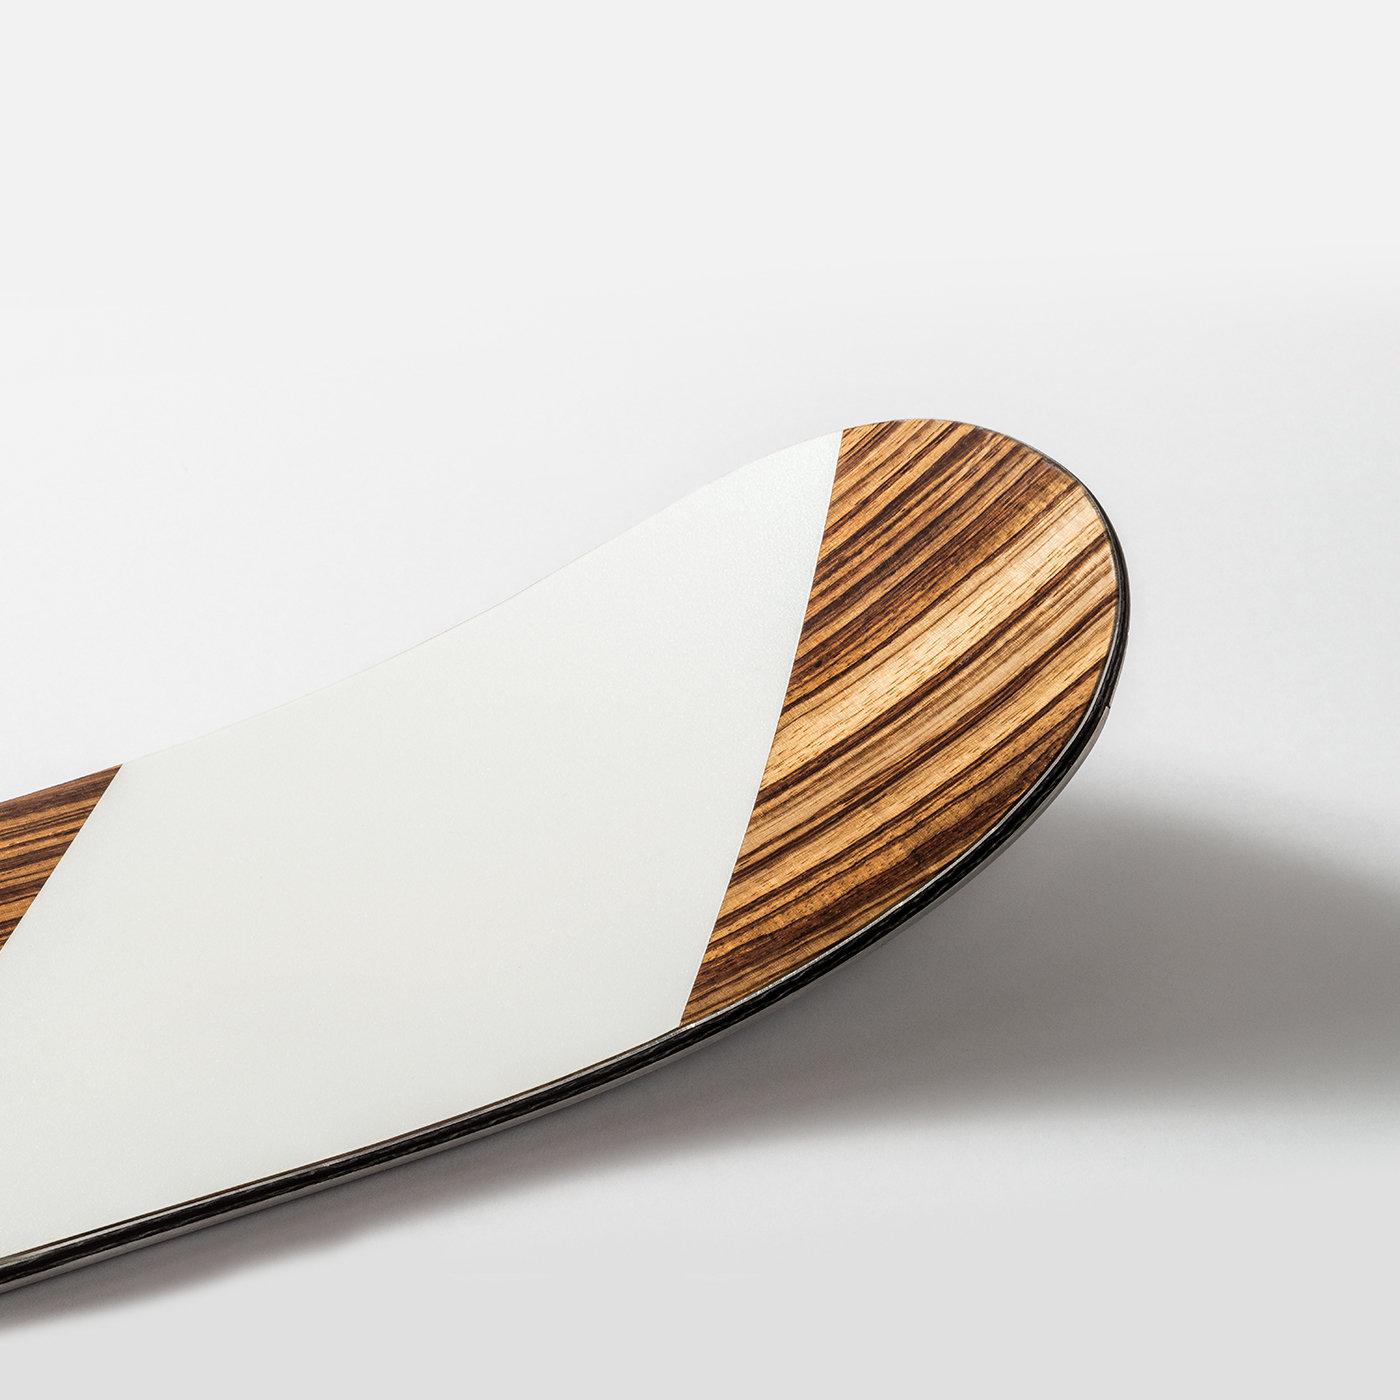 Zero skis are exclusively handmade in a workshop located in the heart of the Italian Alps, where every original design is created with passion, combining unparalleled craftsmanship and technical features. The Nørr skis are designed for off-track